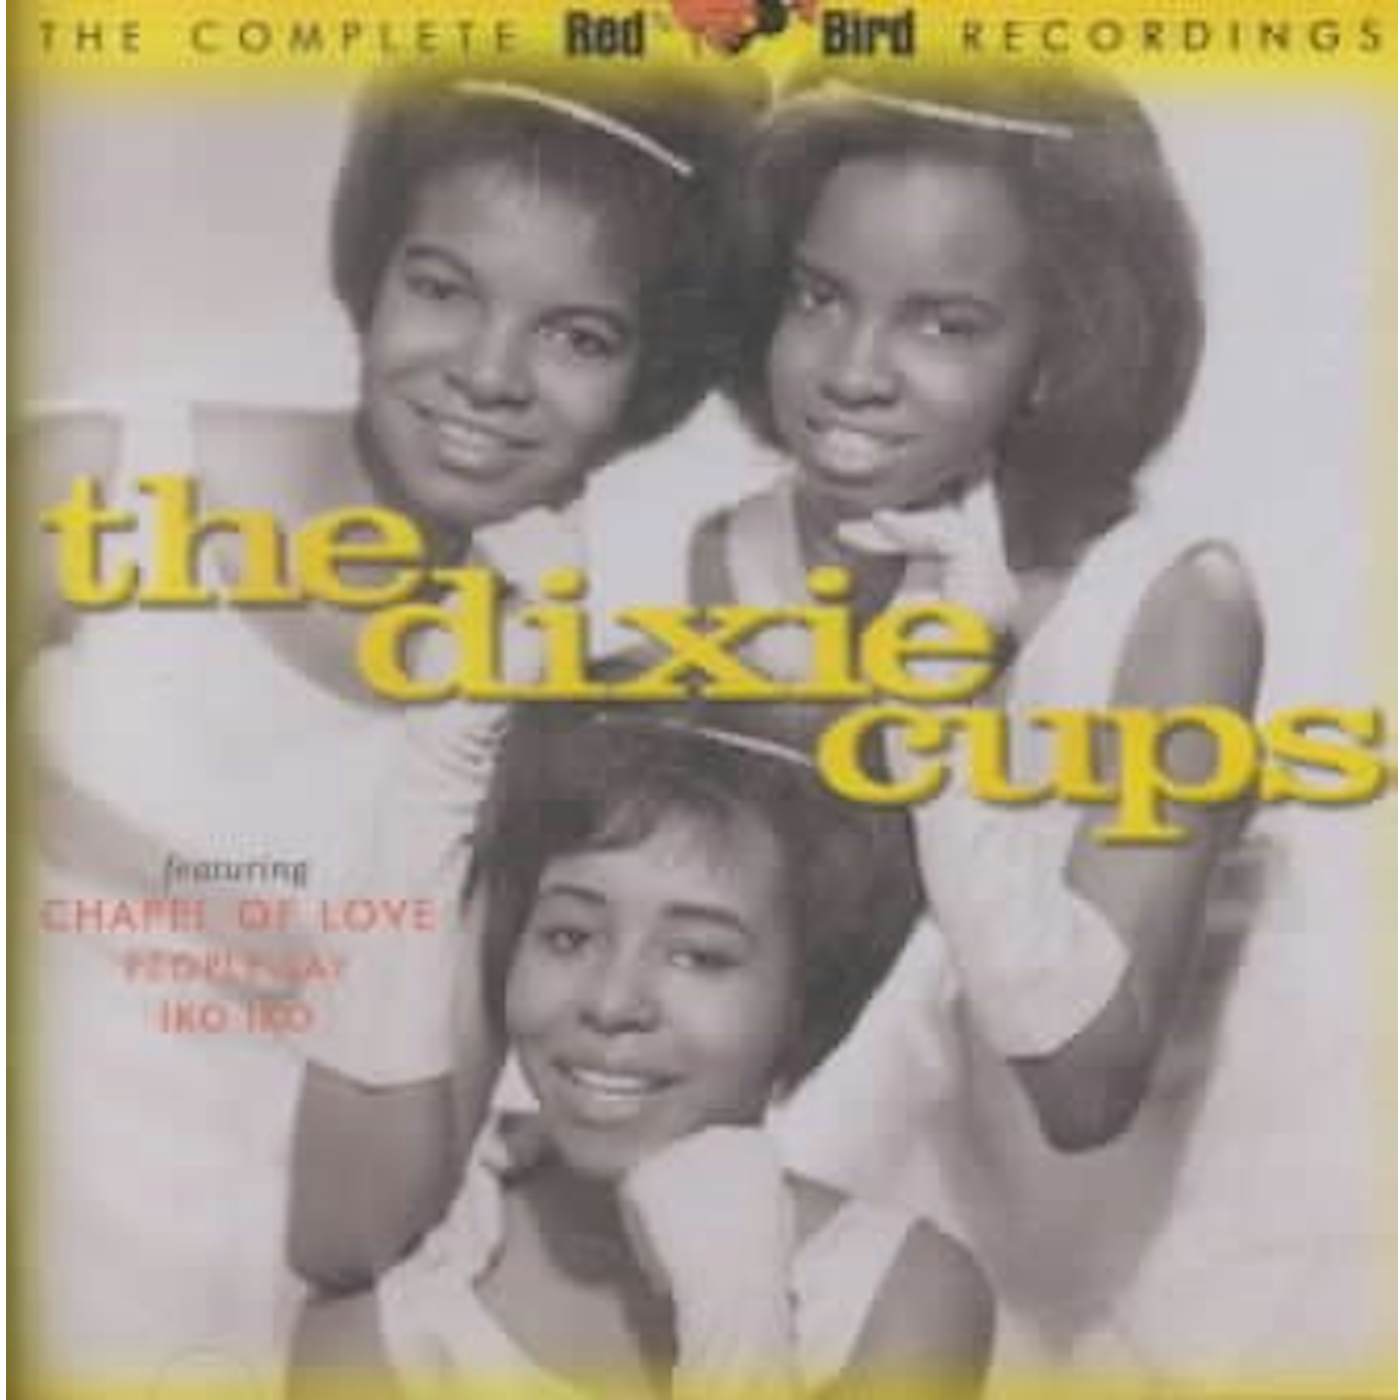 The Dixie Cups The Complete Red Bird Recordings CD